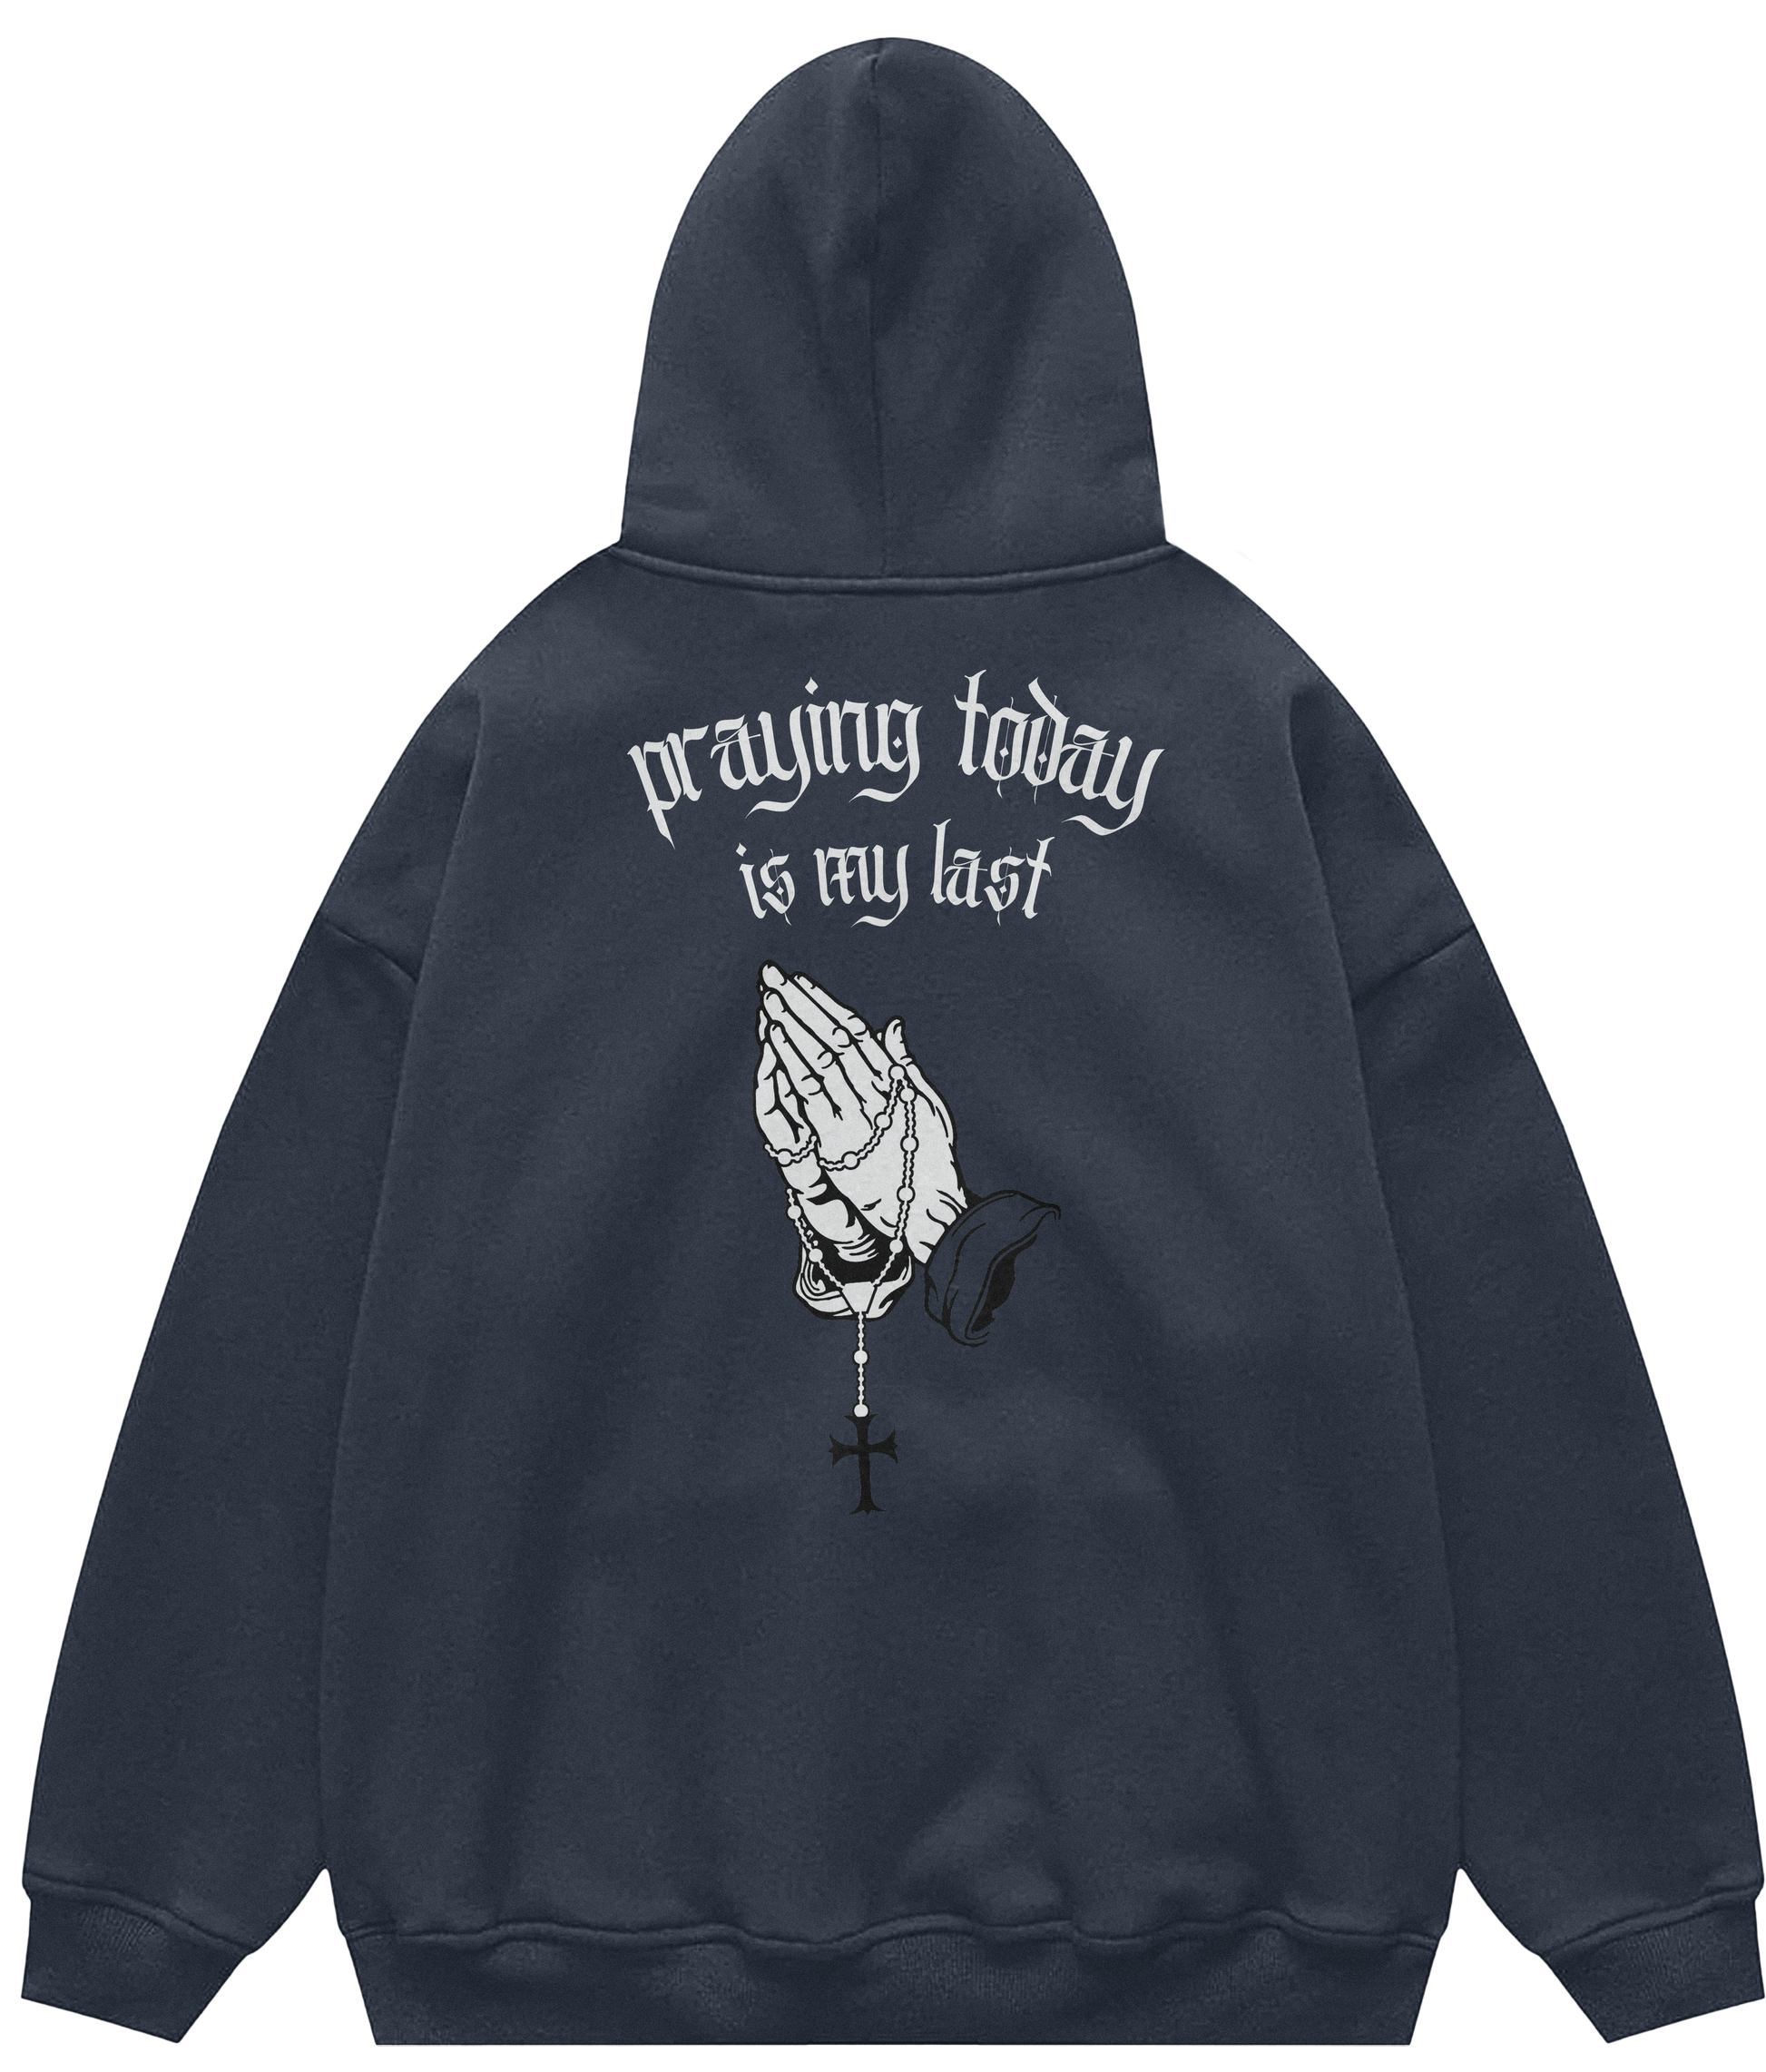 Praying Today Is My Last Hoodie: A Journey Towards Change